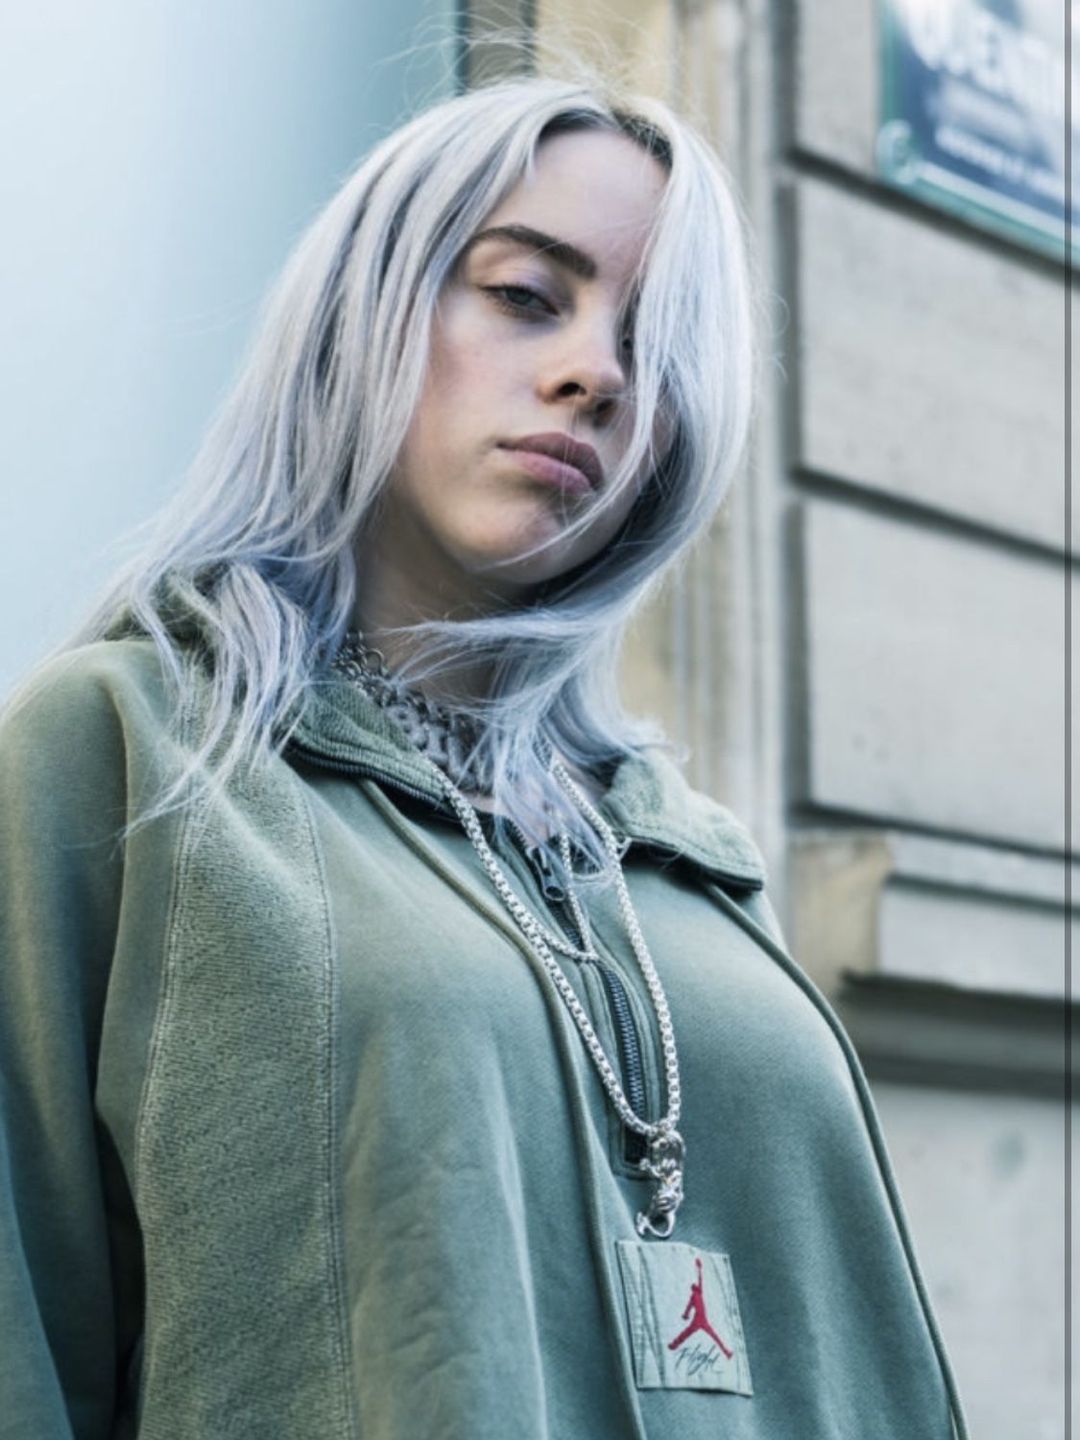 Billie Eilish how old is she